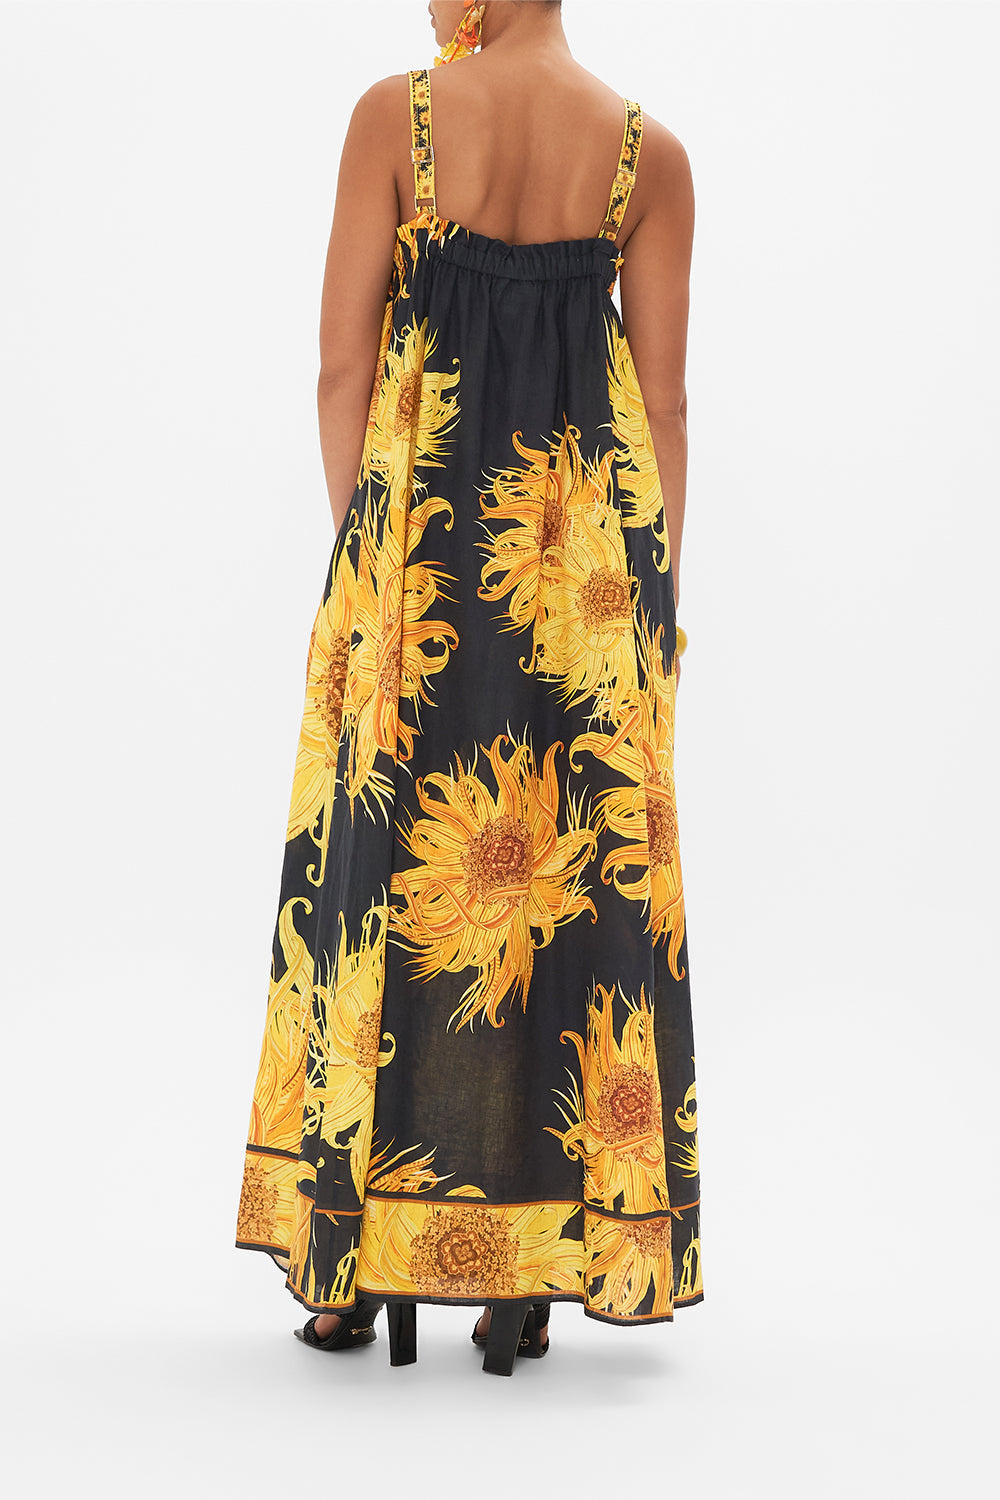 CAMILLA floral sundress in Make Me Your Masterpiece print